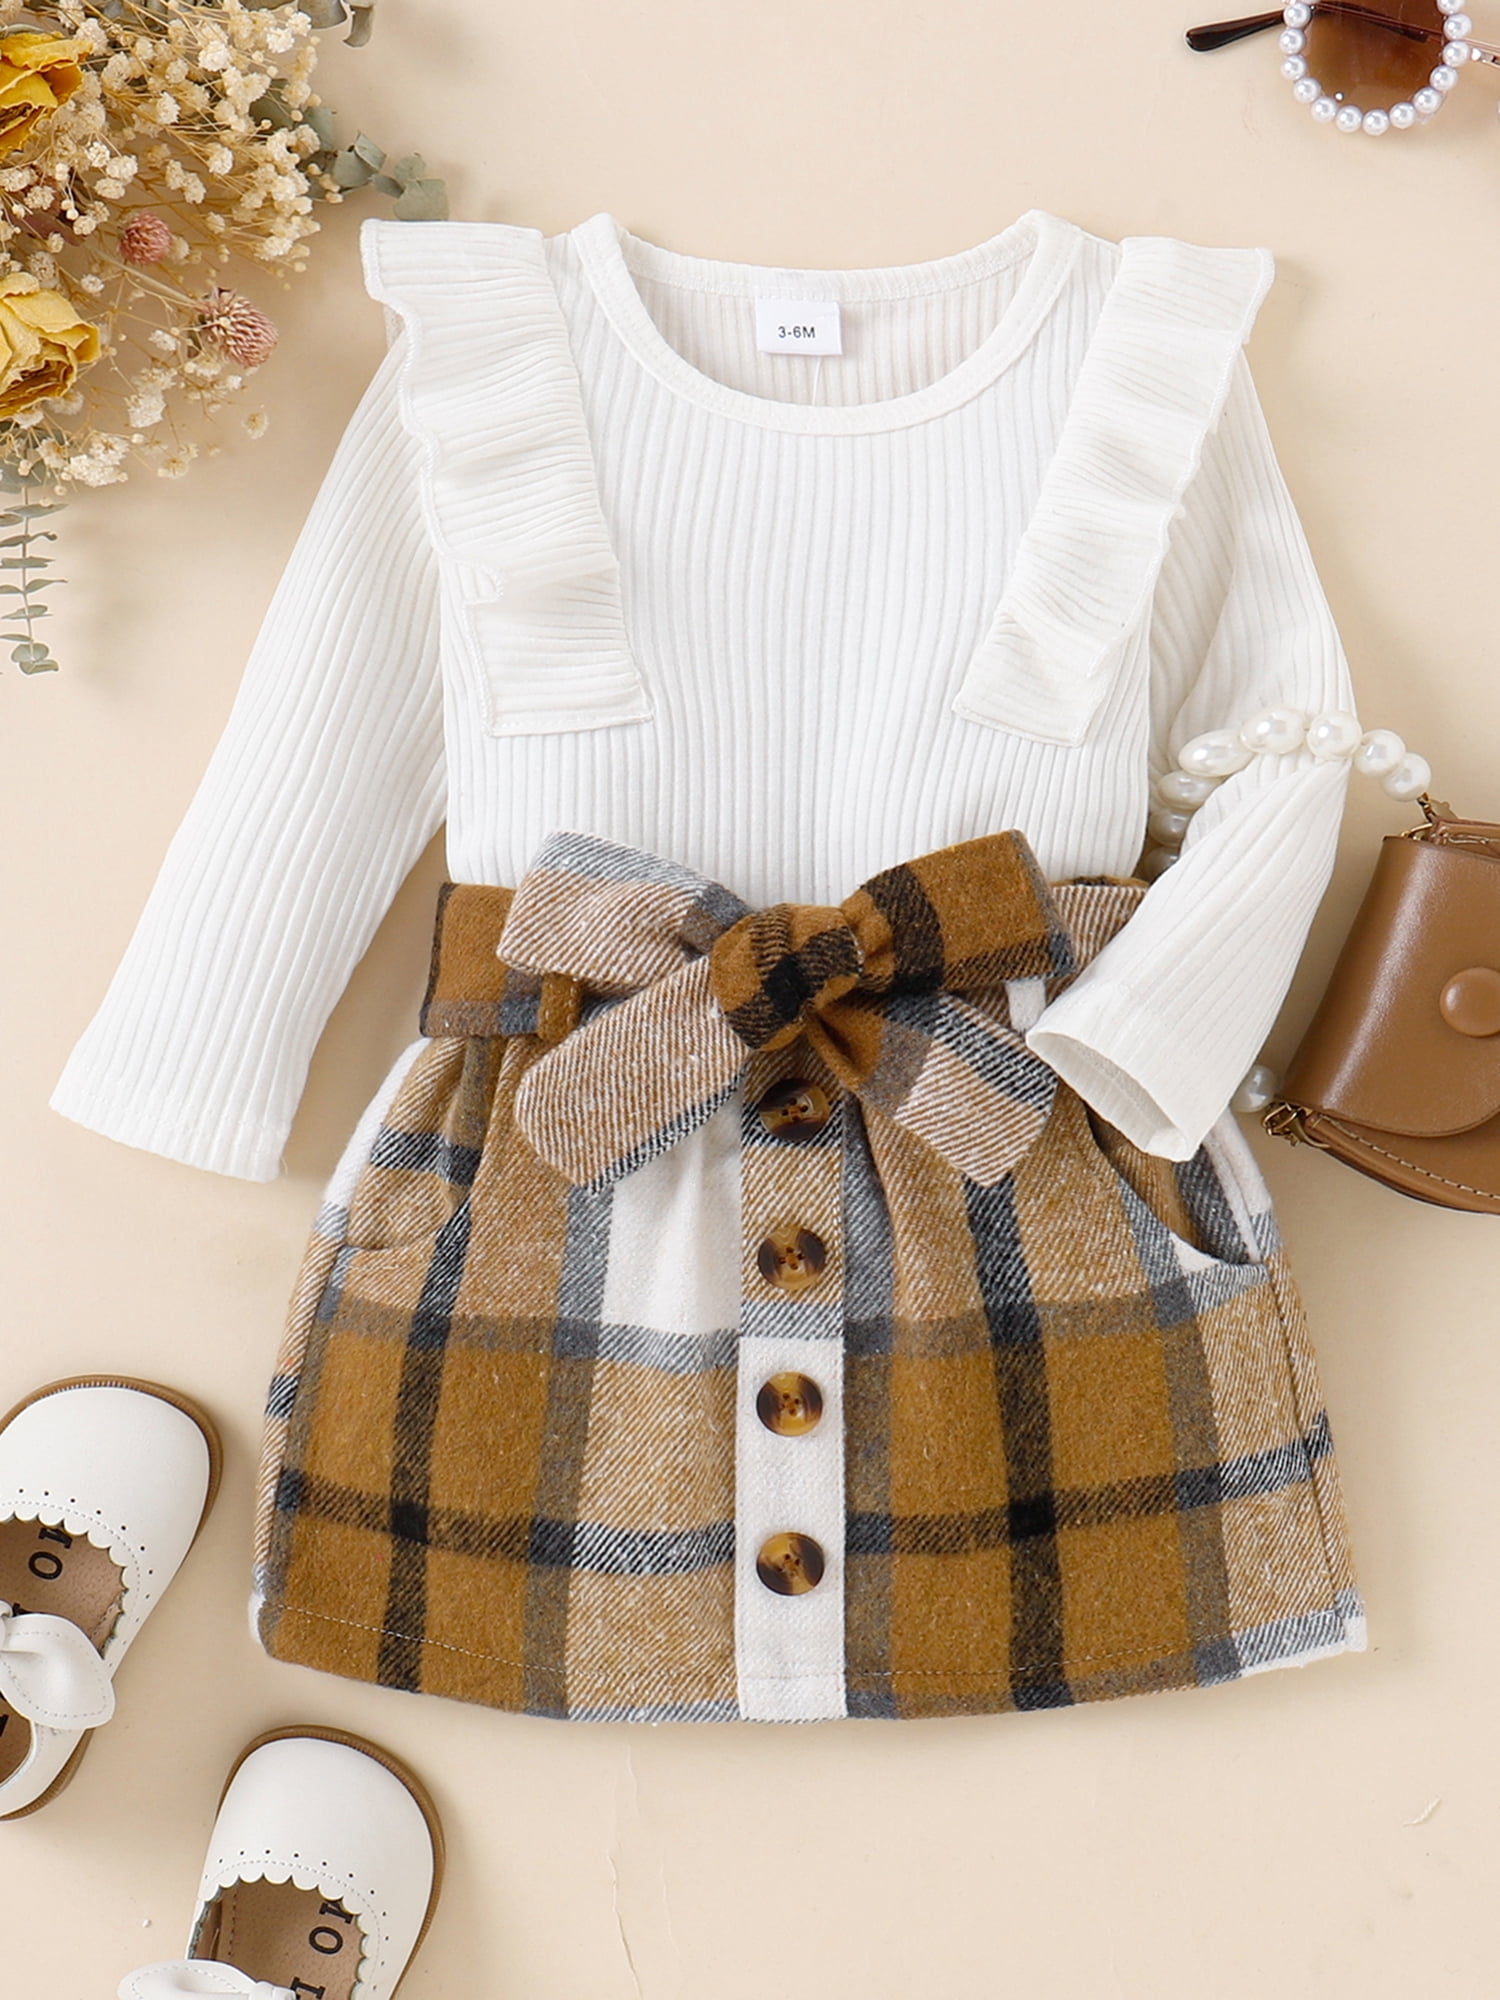 BOIZONTY Toddler Baby Girl Red Plaid Outfits Ruffled Sleeve Crop Top Shirts with Bowknot+ Denim Skirt Dress Clothes Set